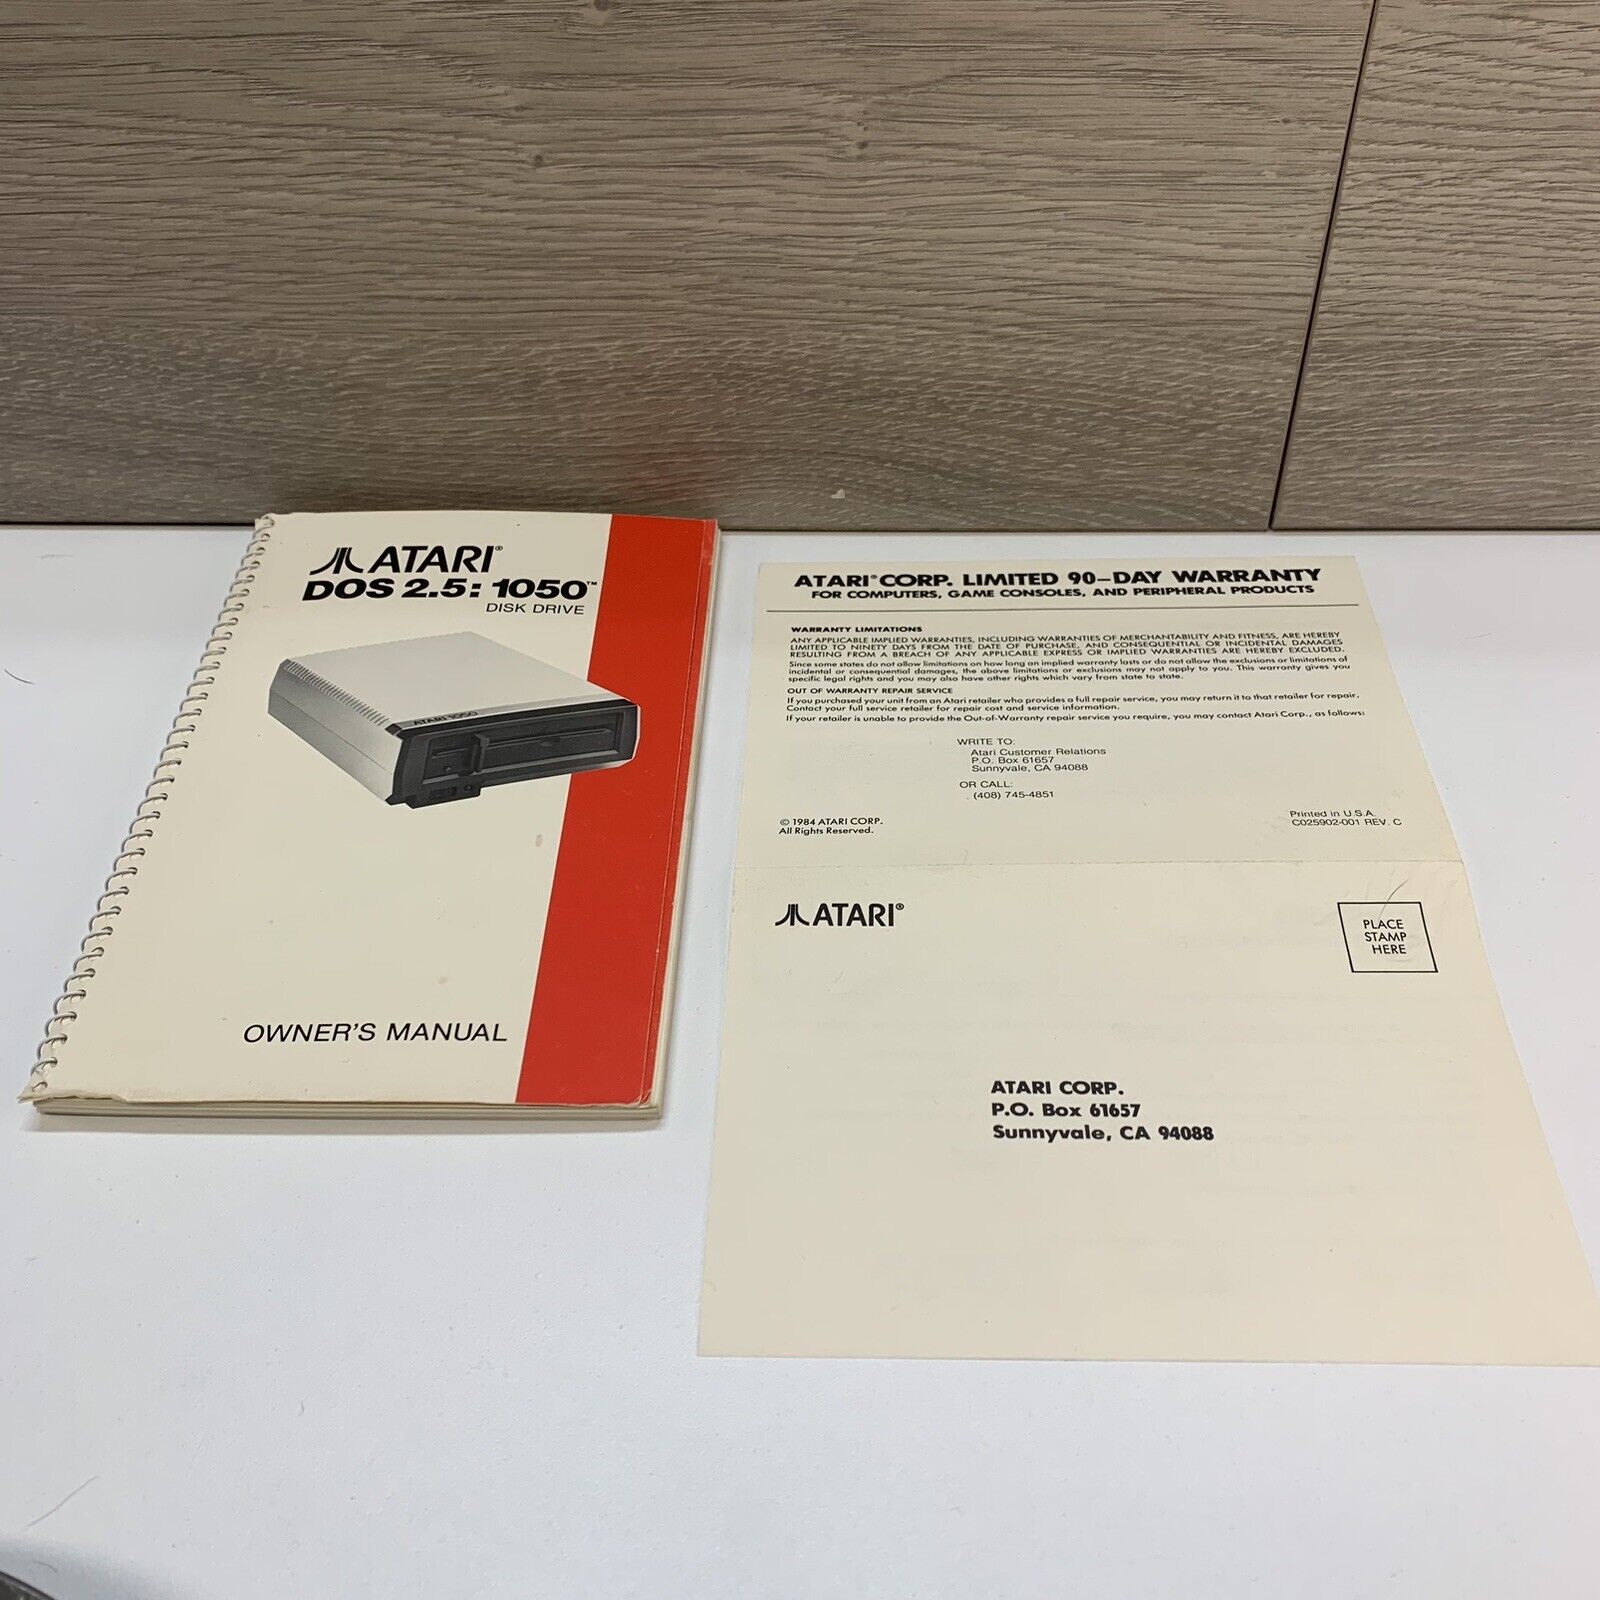 Original Atari OWNERS MANUAL for 1050 disk drive w/DOS 2.5  And Warranty Card